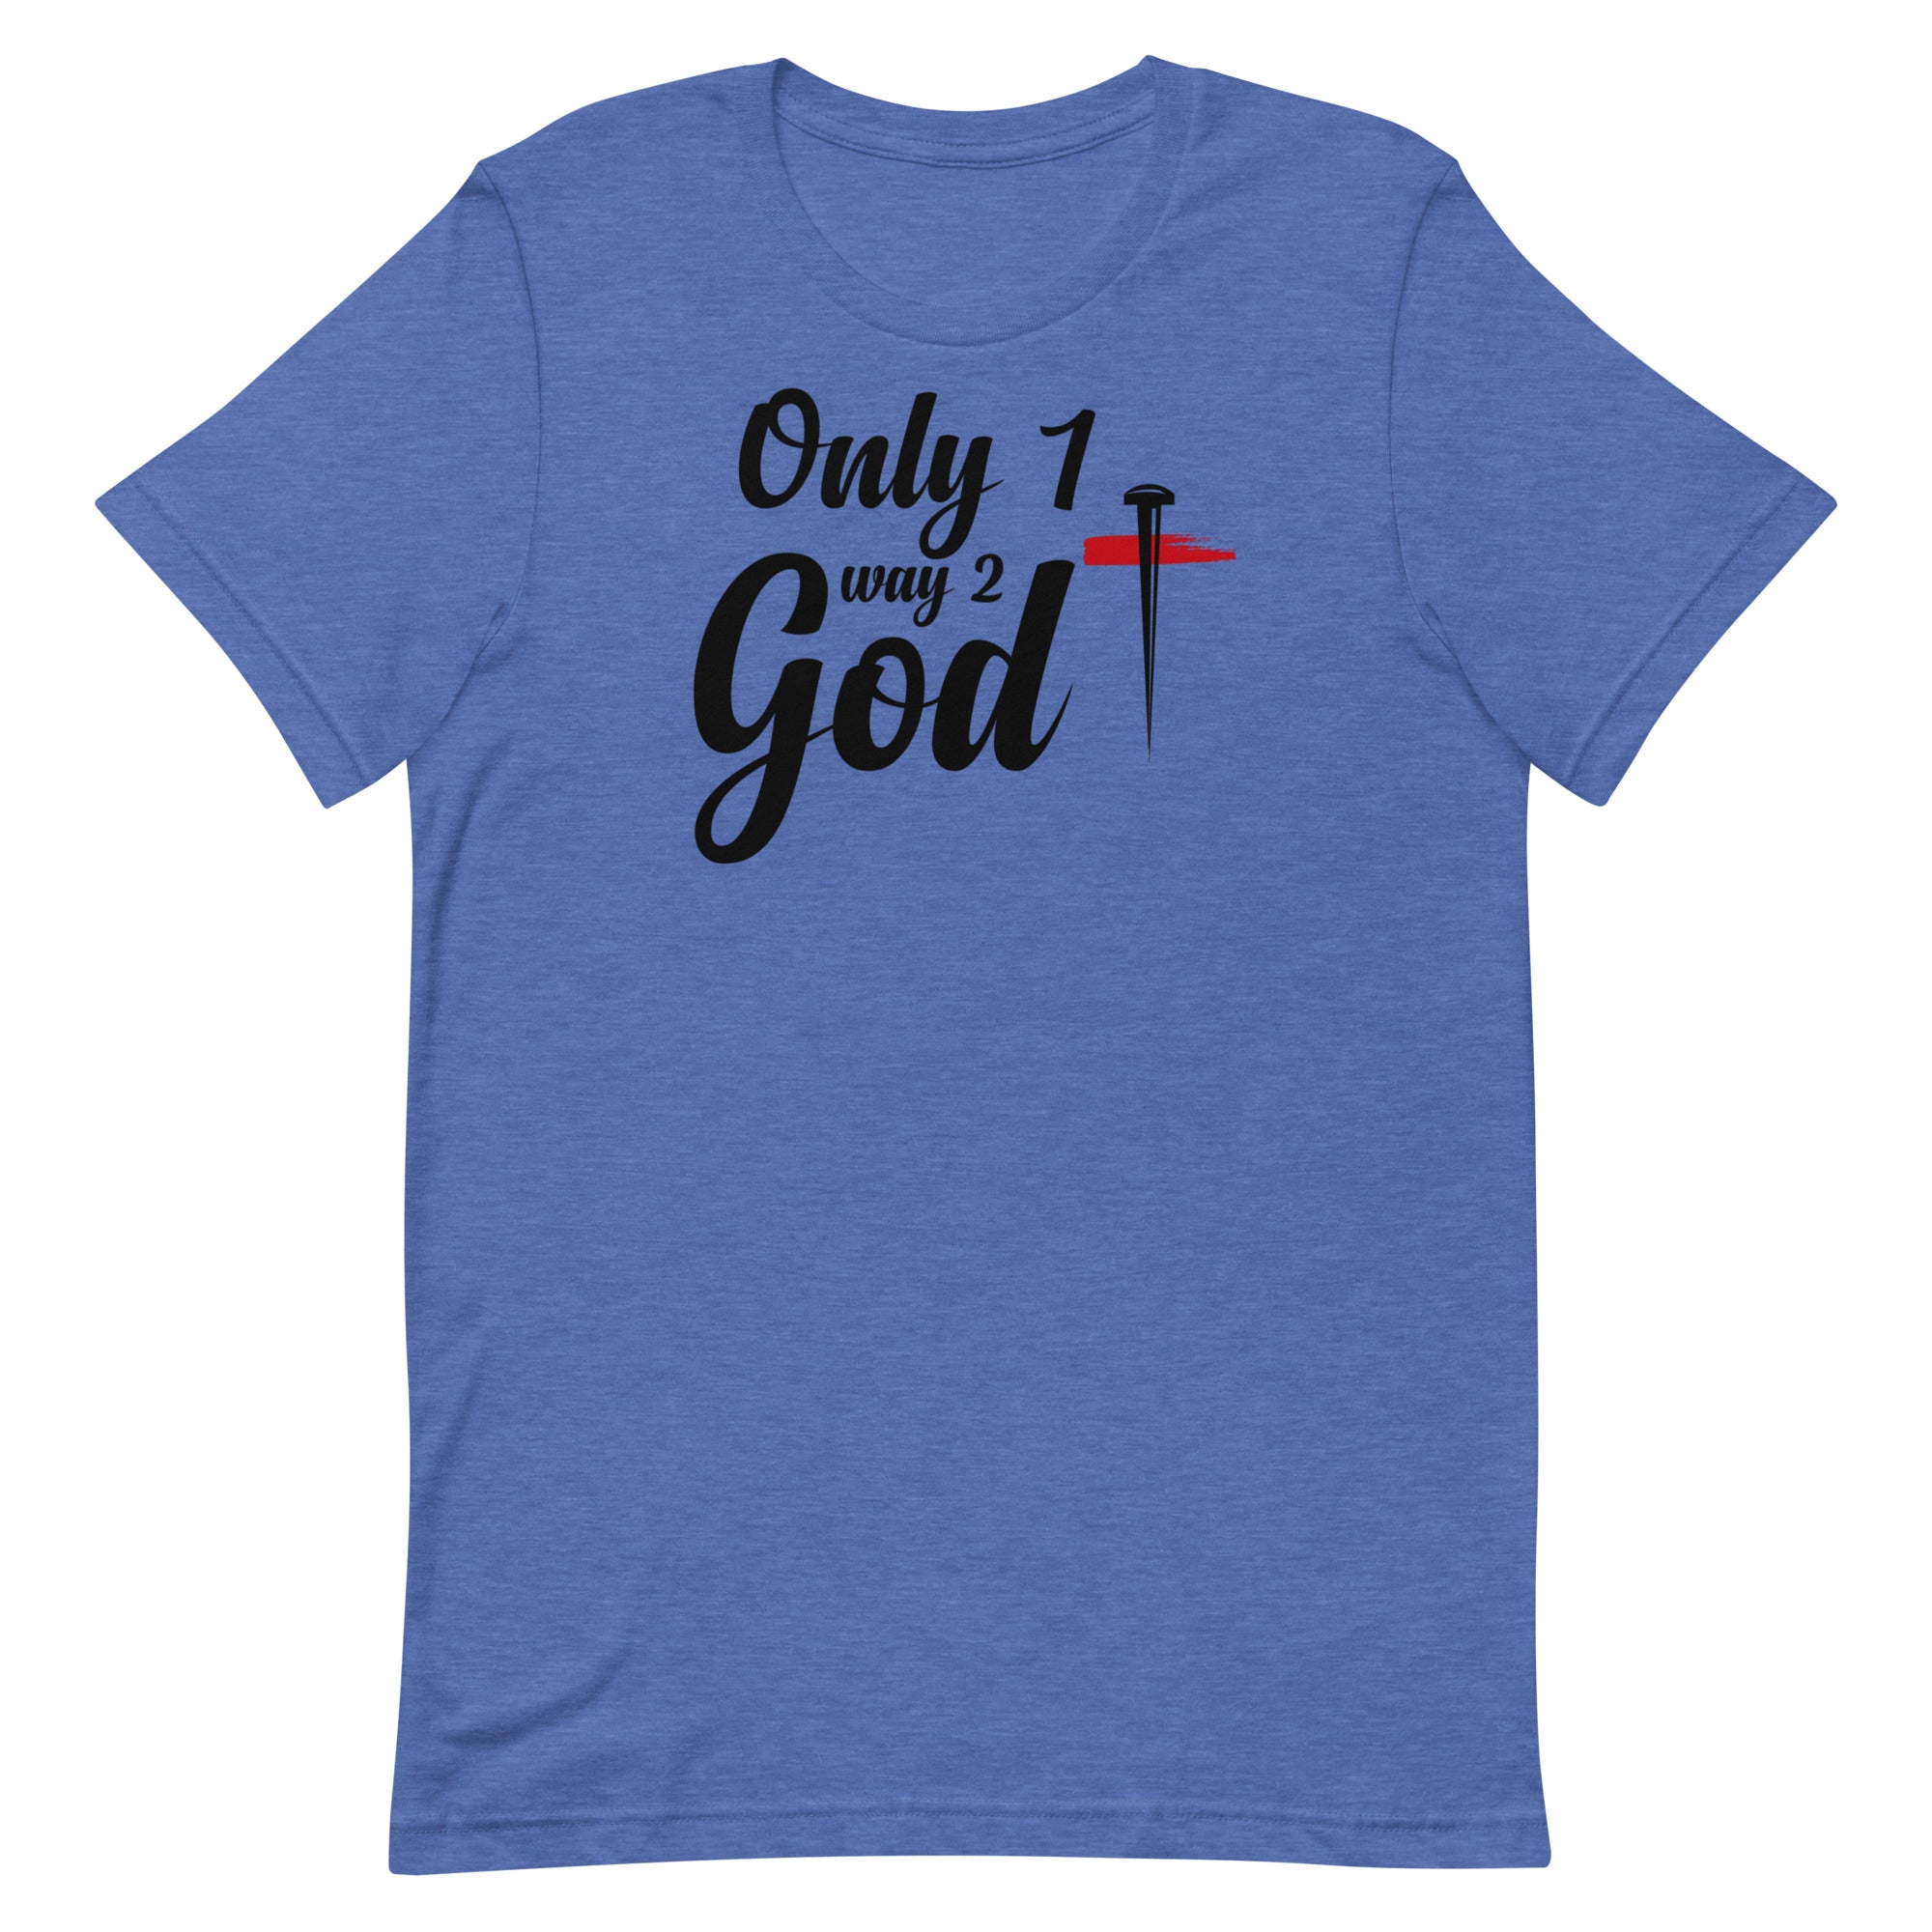 ONLY 1 WAY 2 GOD MENS FRONT AND BACK T-SHIRT